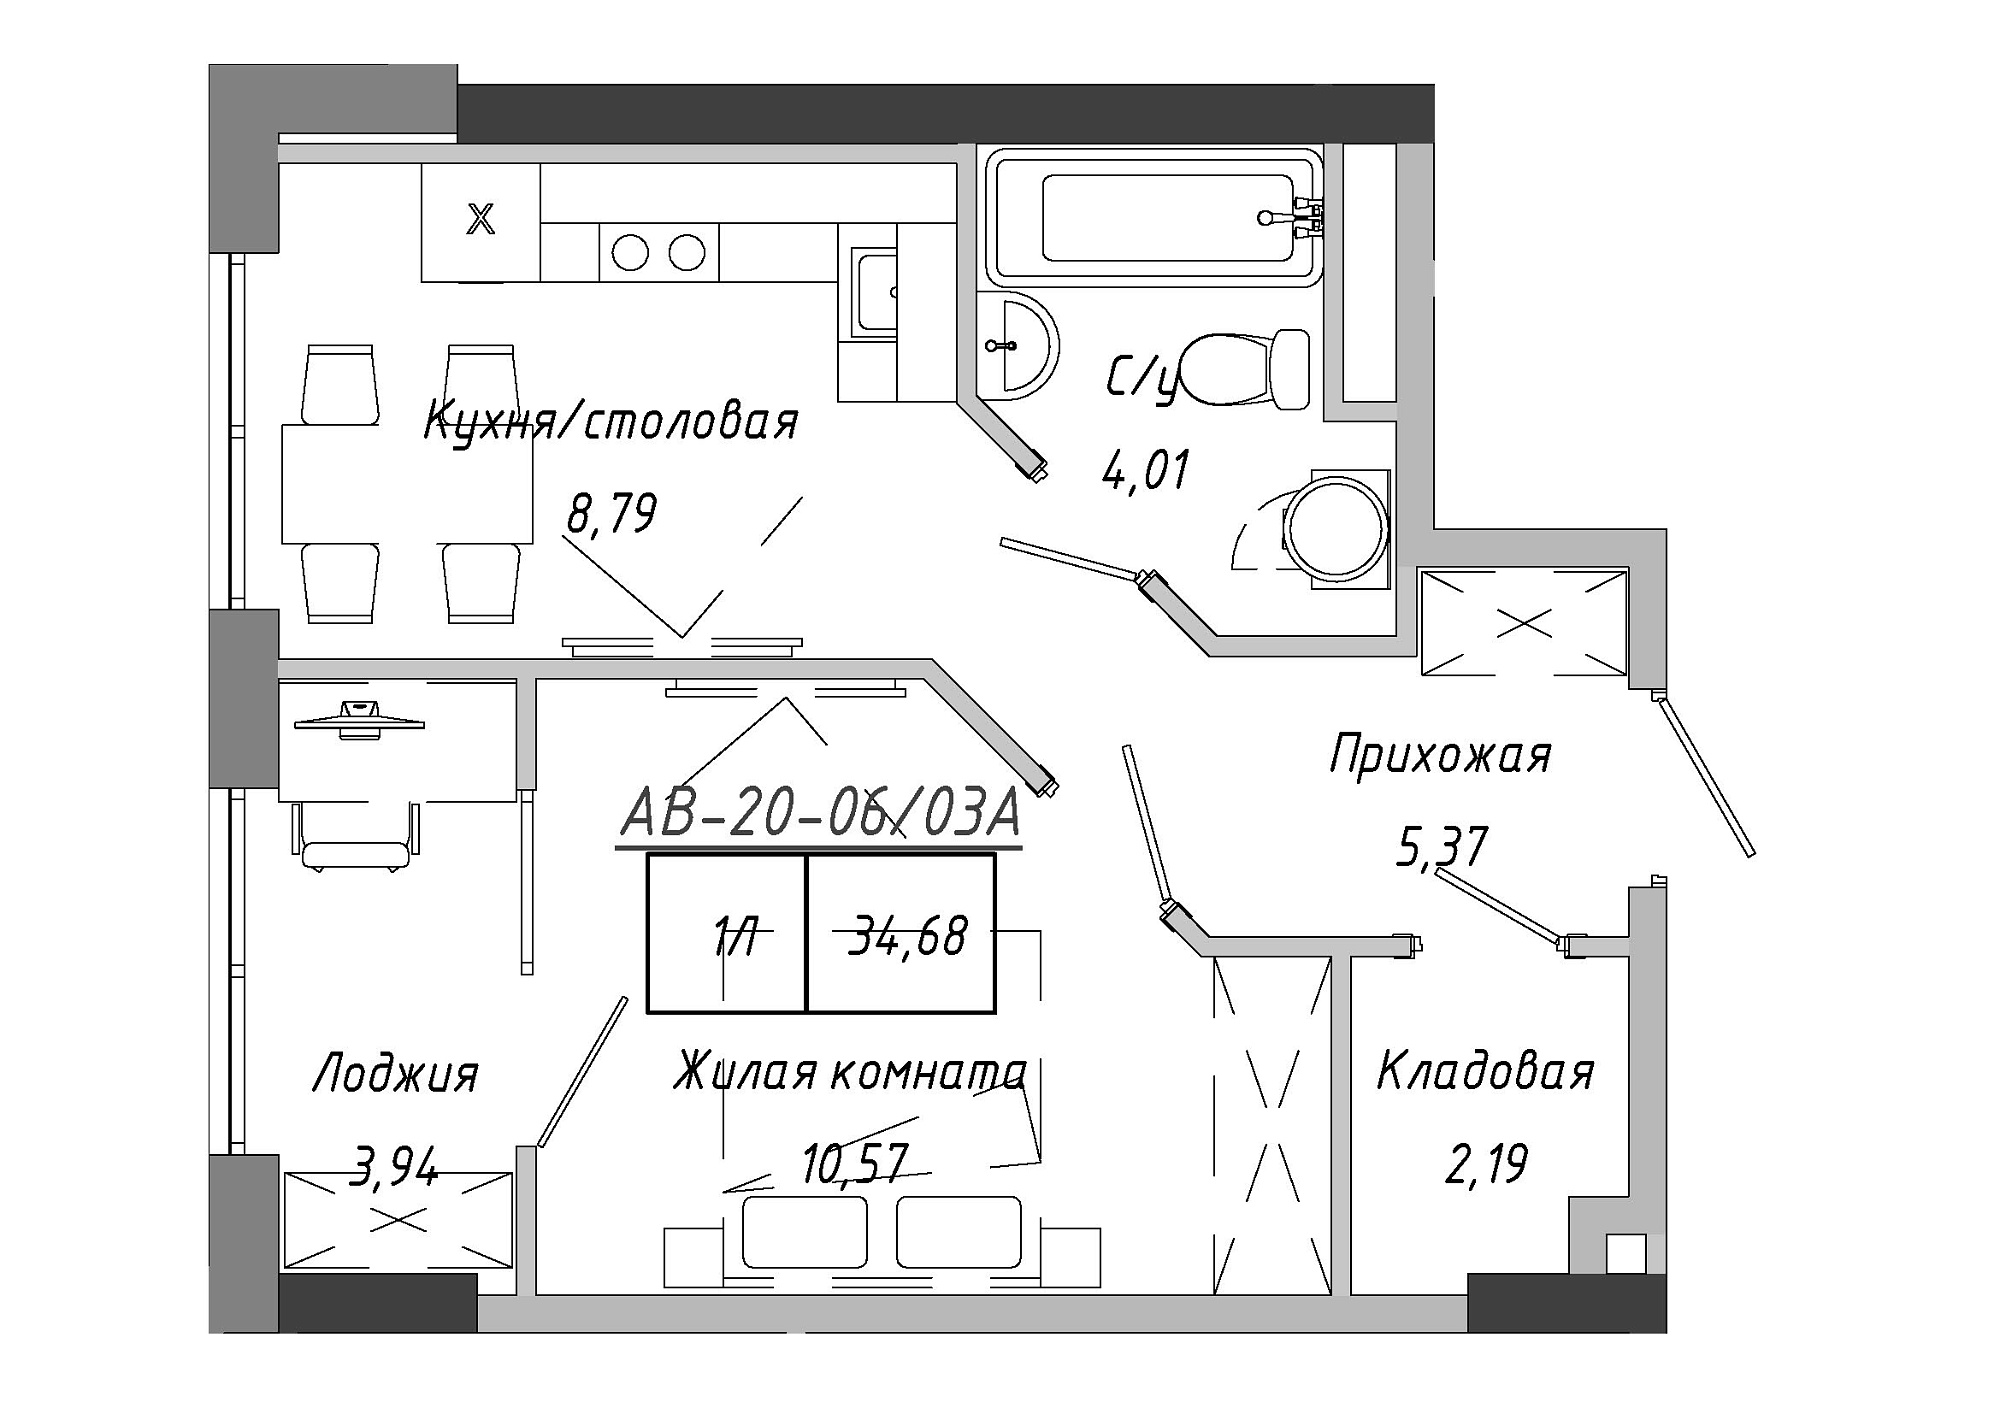 Planning 1-rm flats area 35.26m2, AB-20-06/0003а.